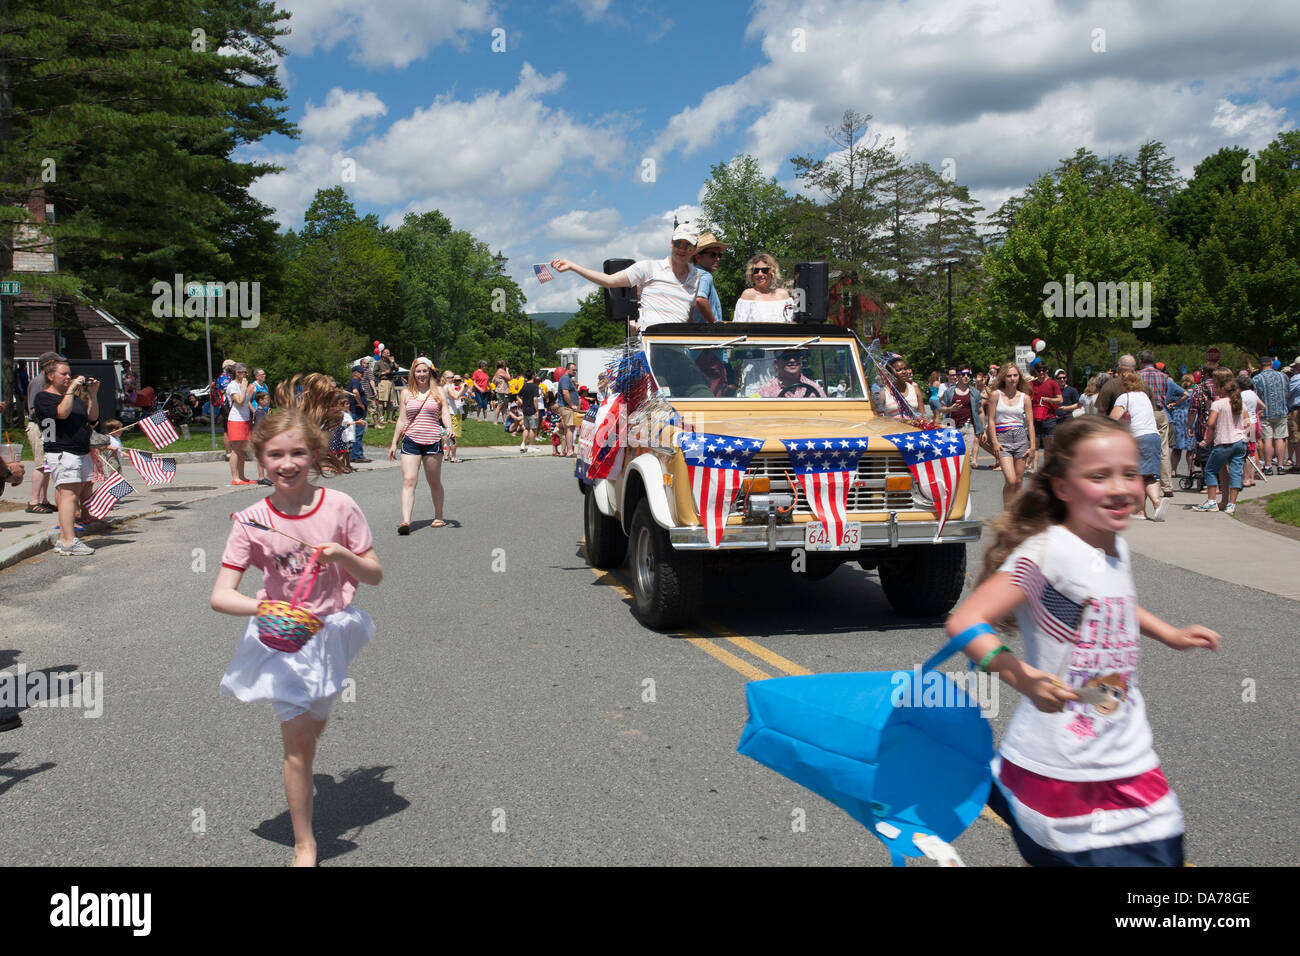 The 4th of July celebration in Williamstown Massachusetts includes a parade and a float by  the Williamstown theater Festival. Stock Photo